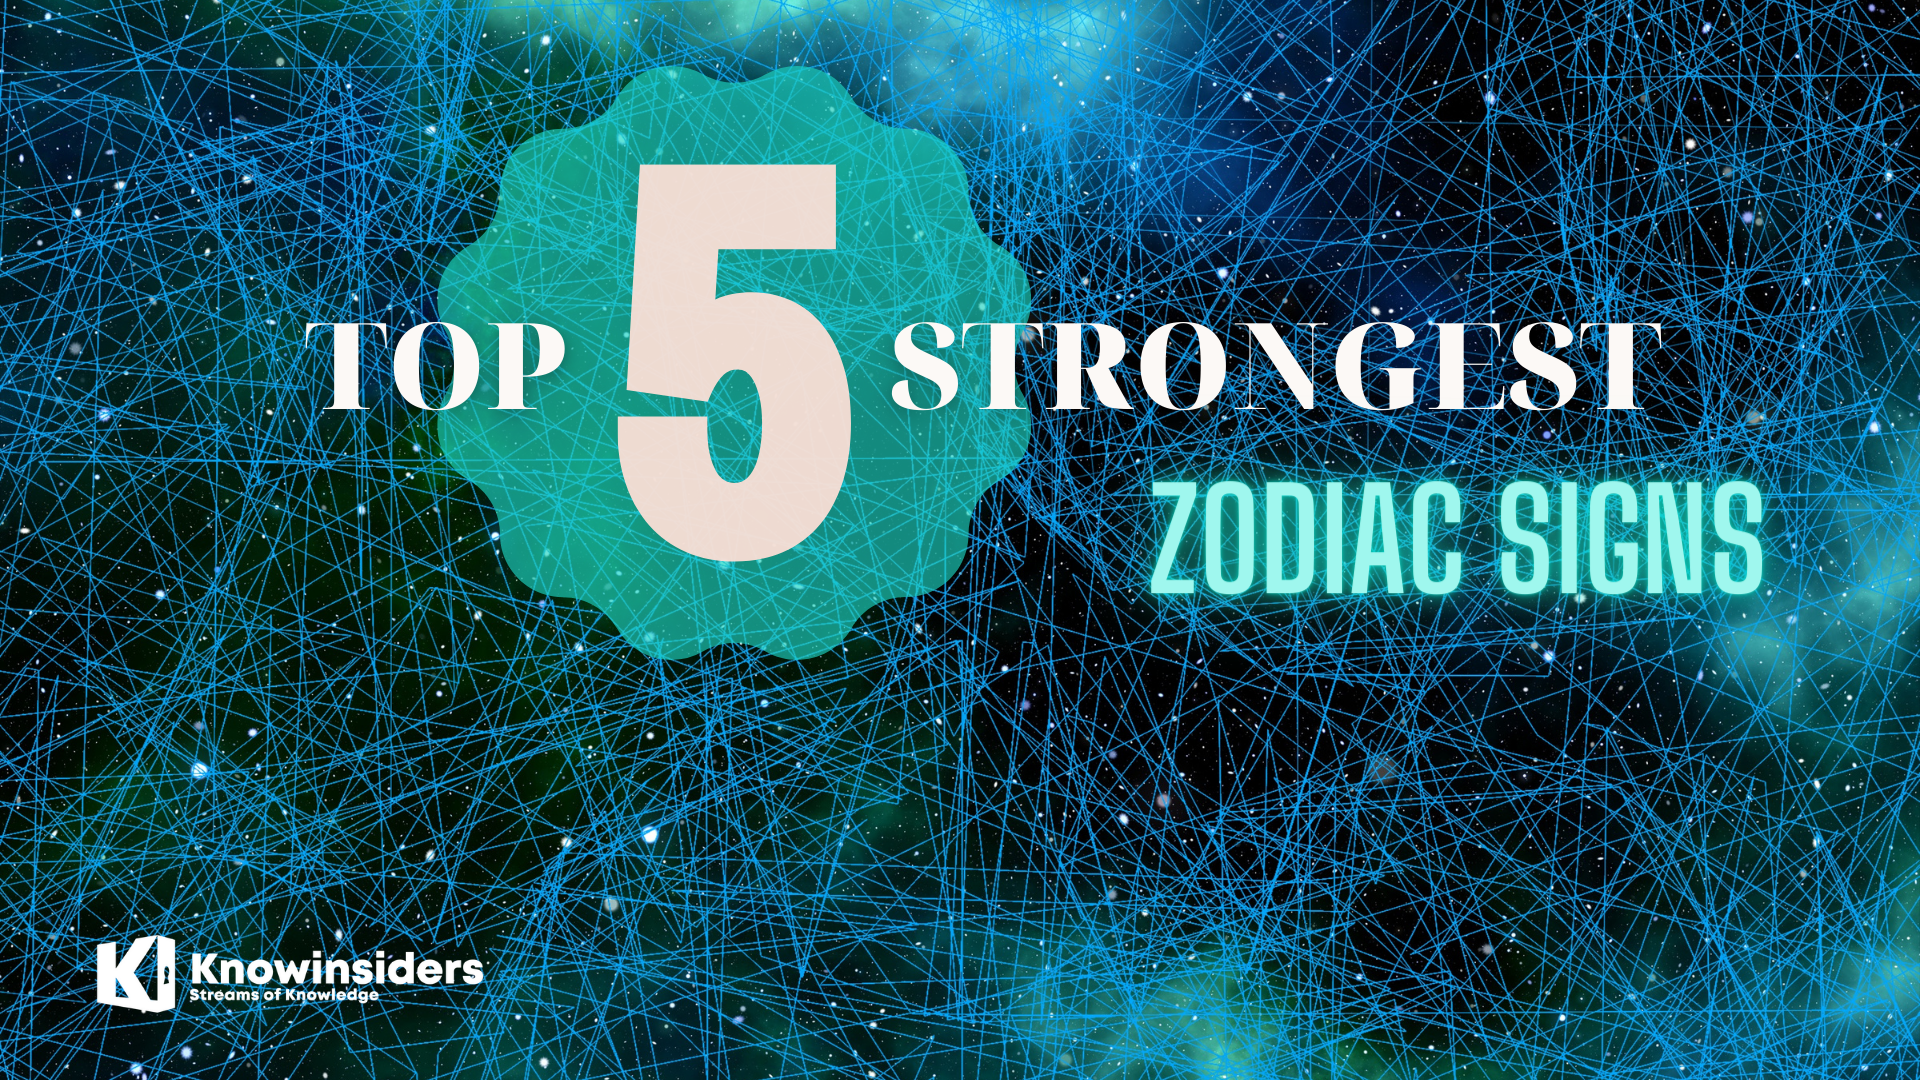 Top 5 Strongest Zodiac Signs According to Astrology